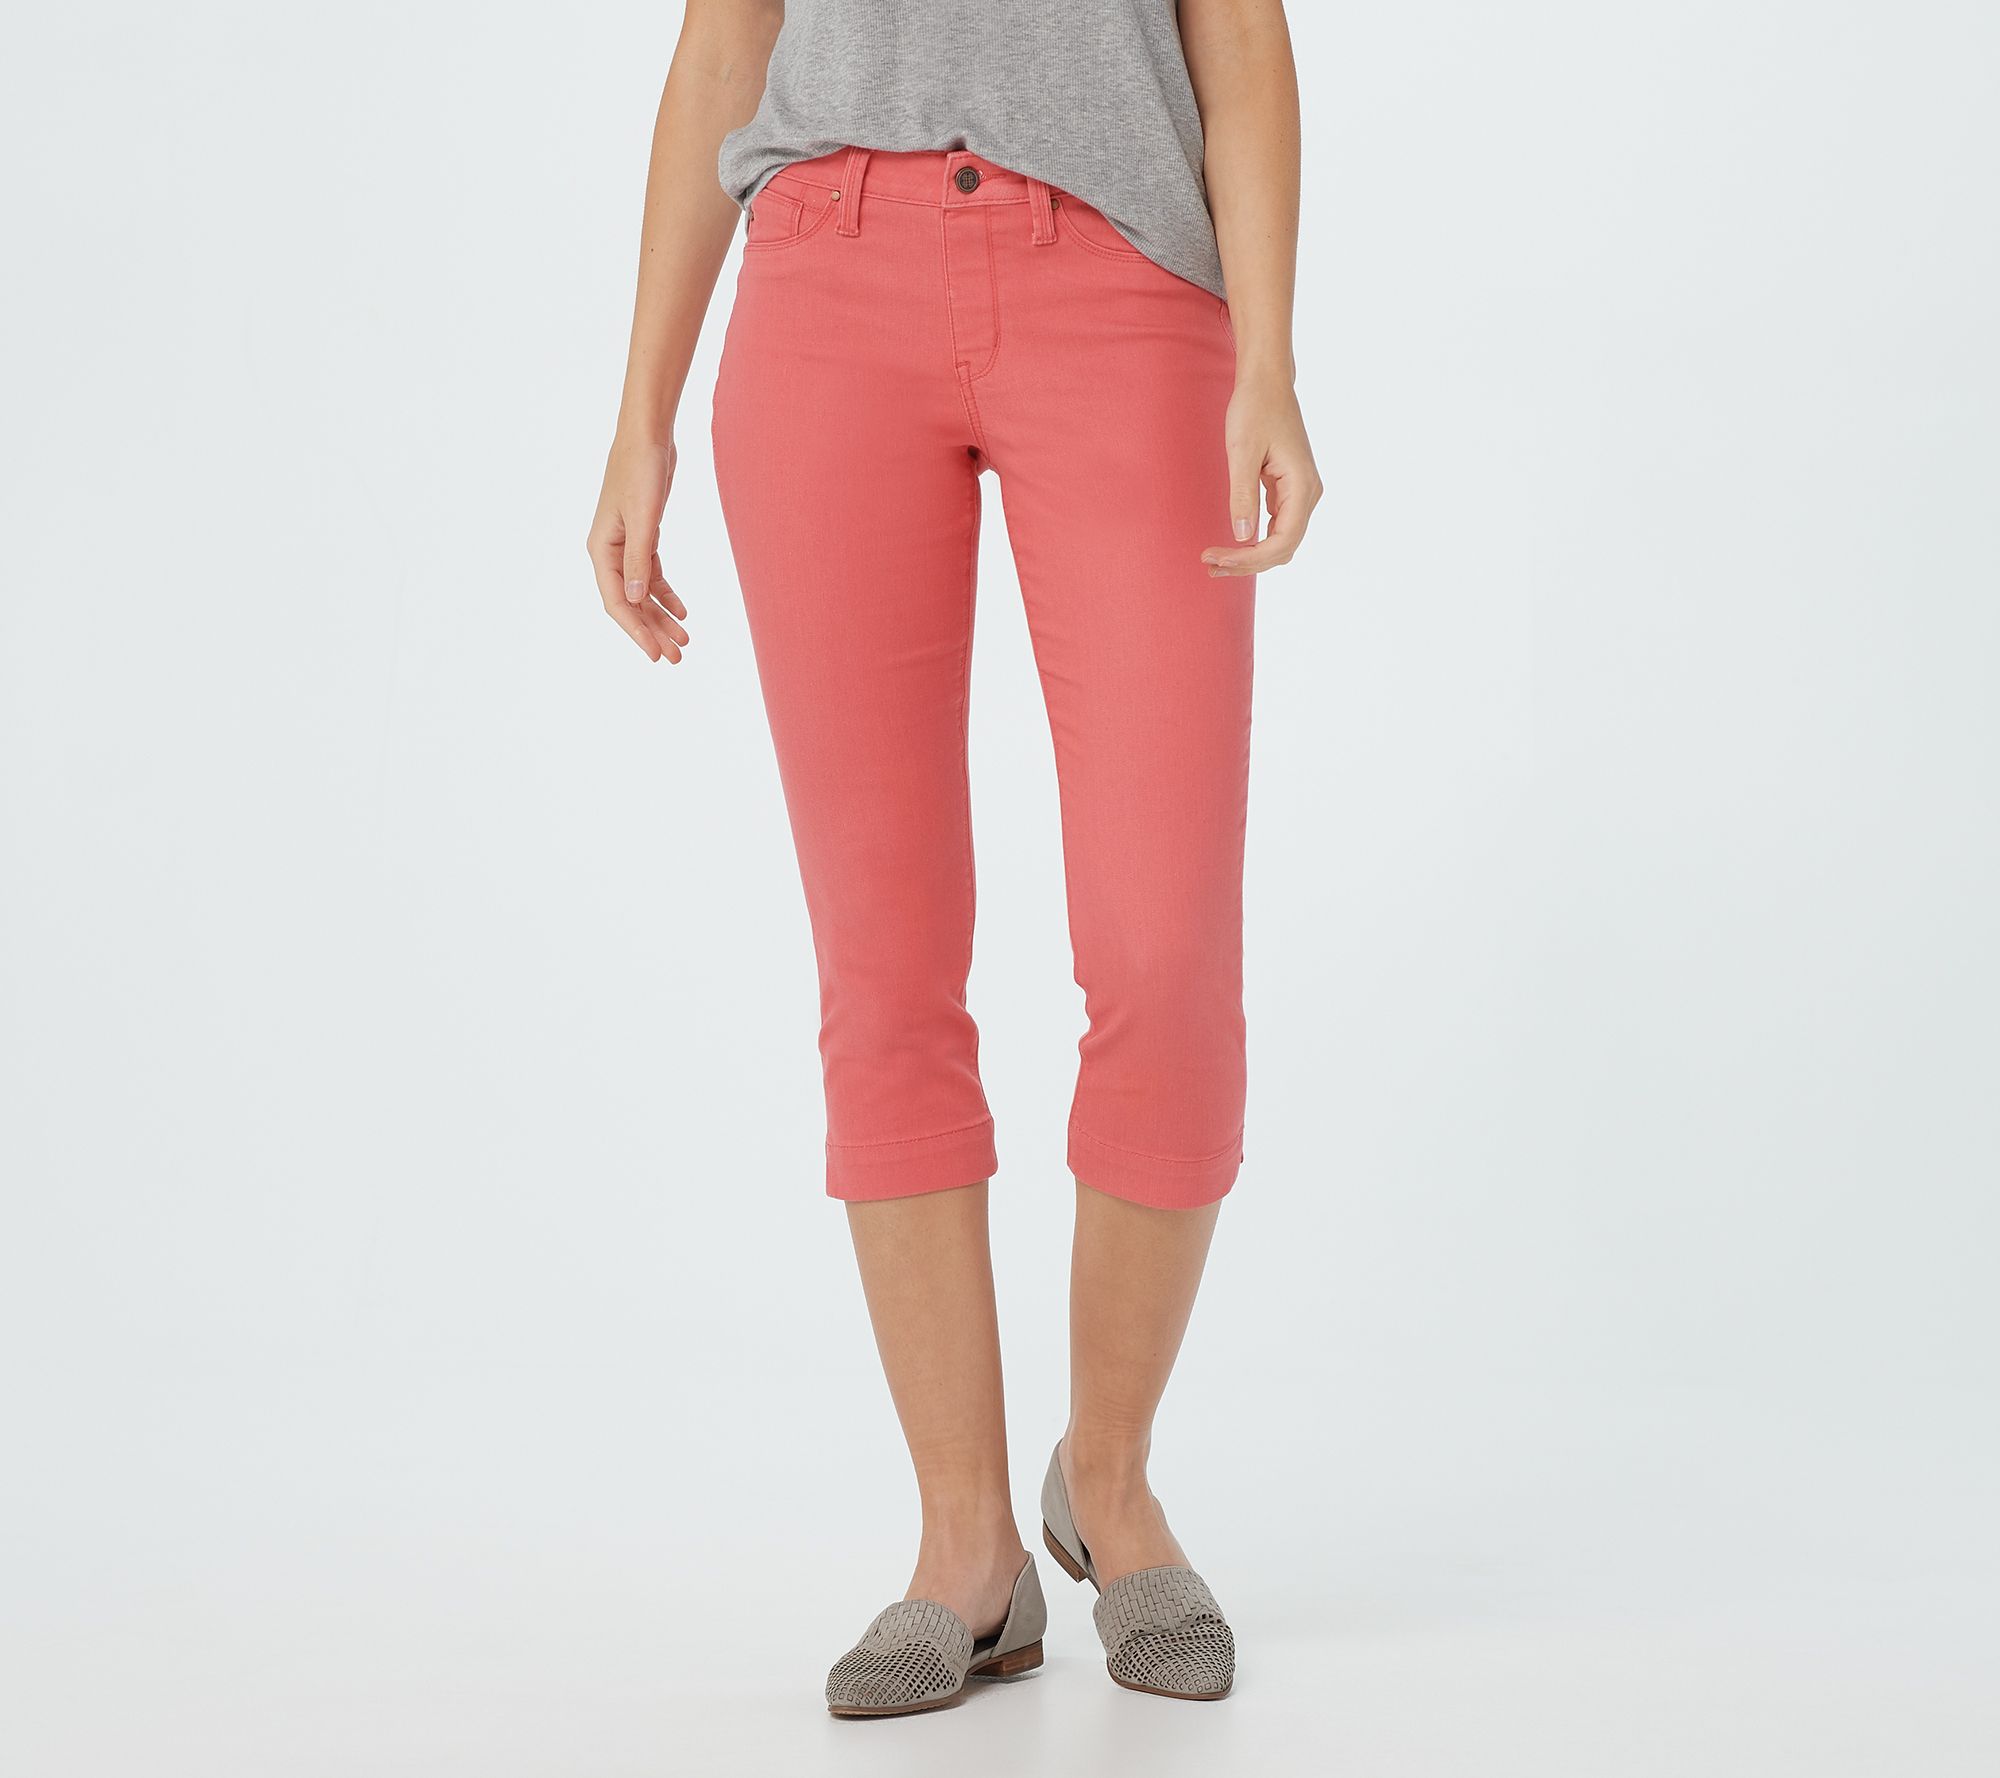 pull on colored jeans